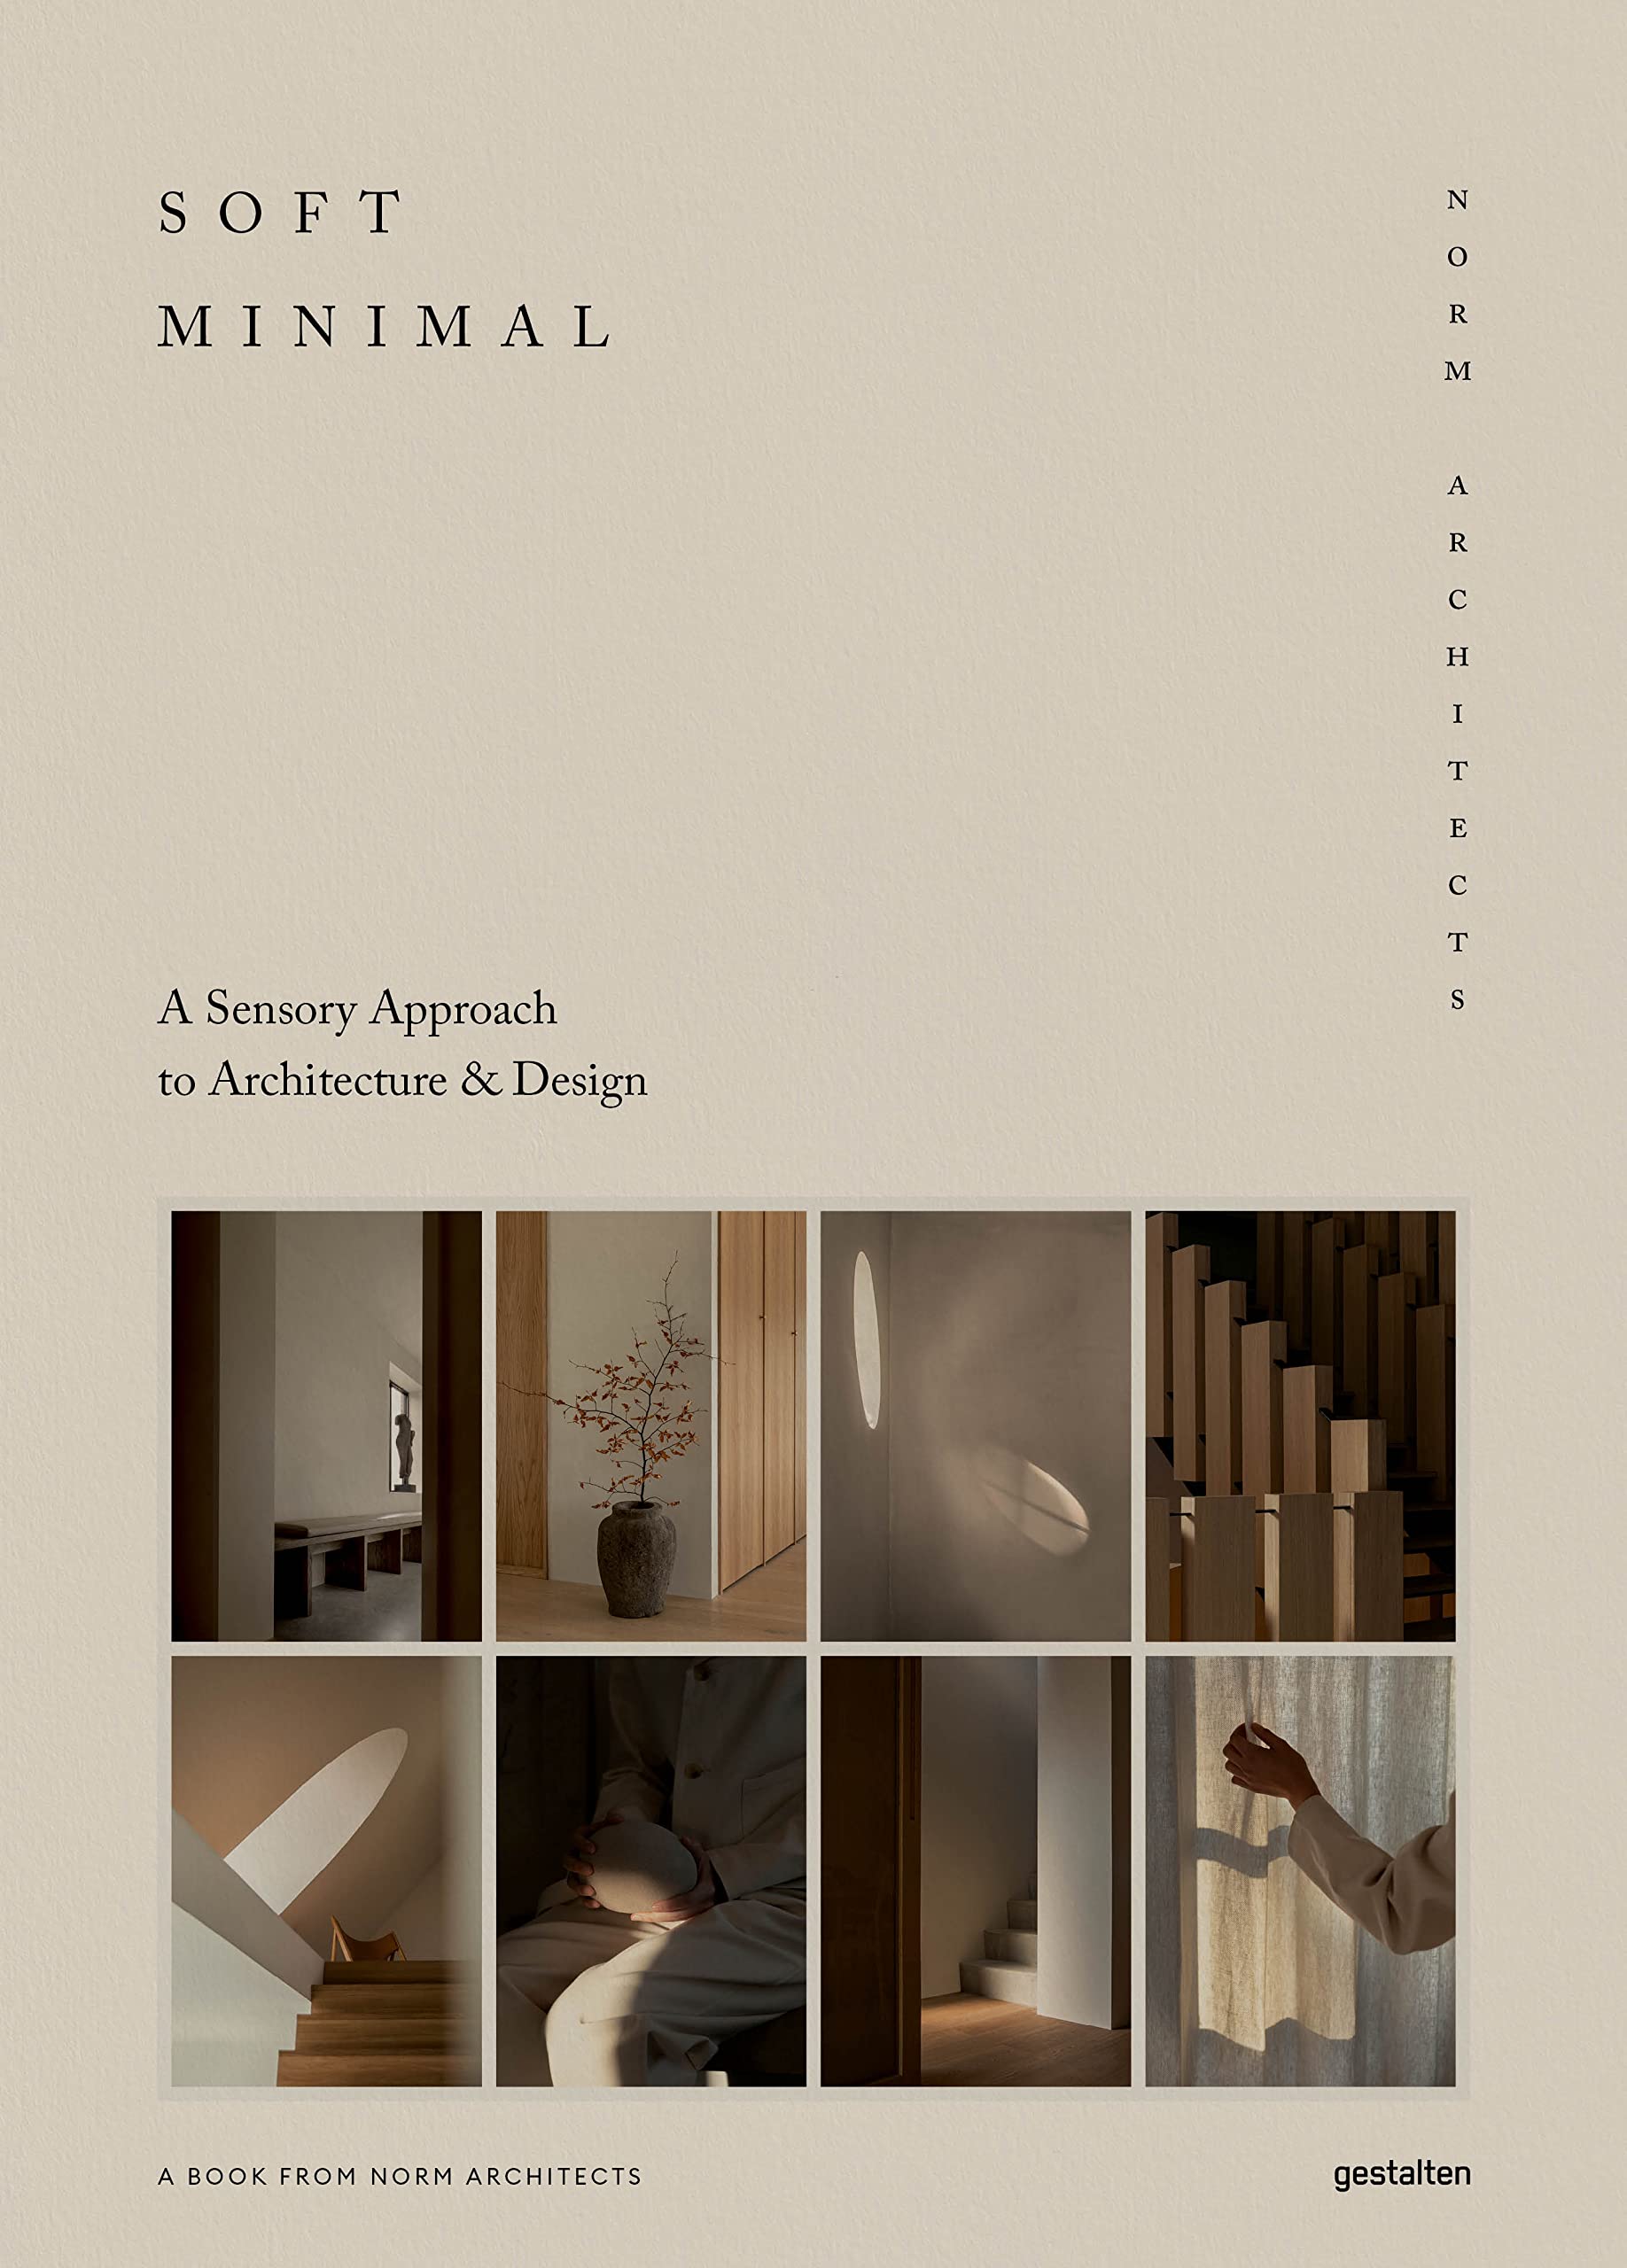 Soft Minimal: Norm Architects: A Sensory Approach to Architecture and Design (Hardcover)